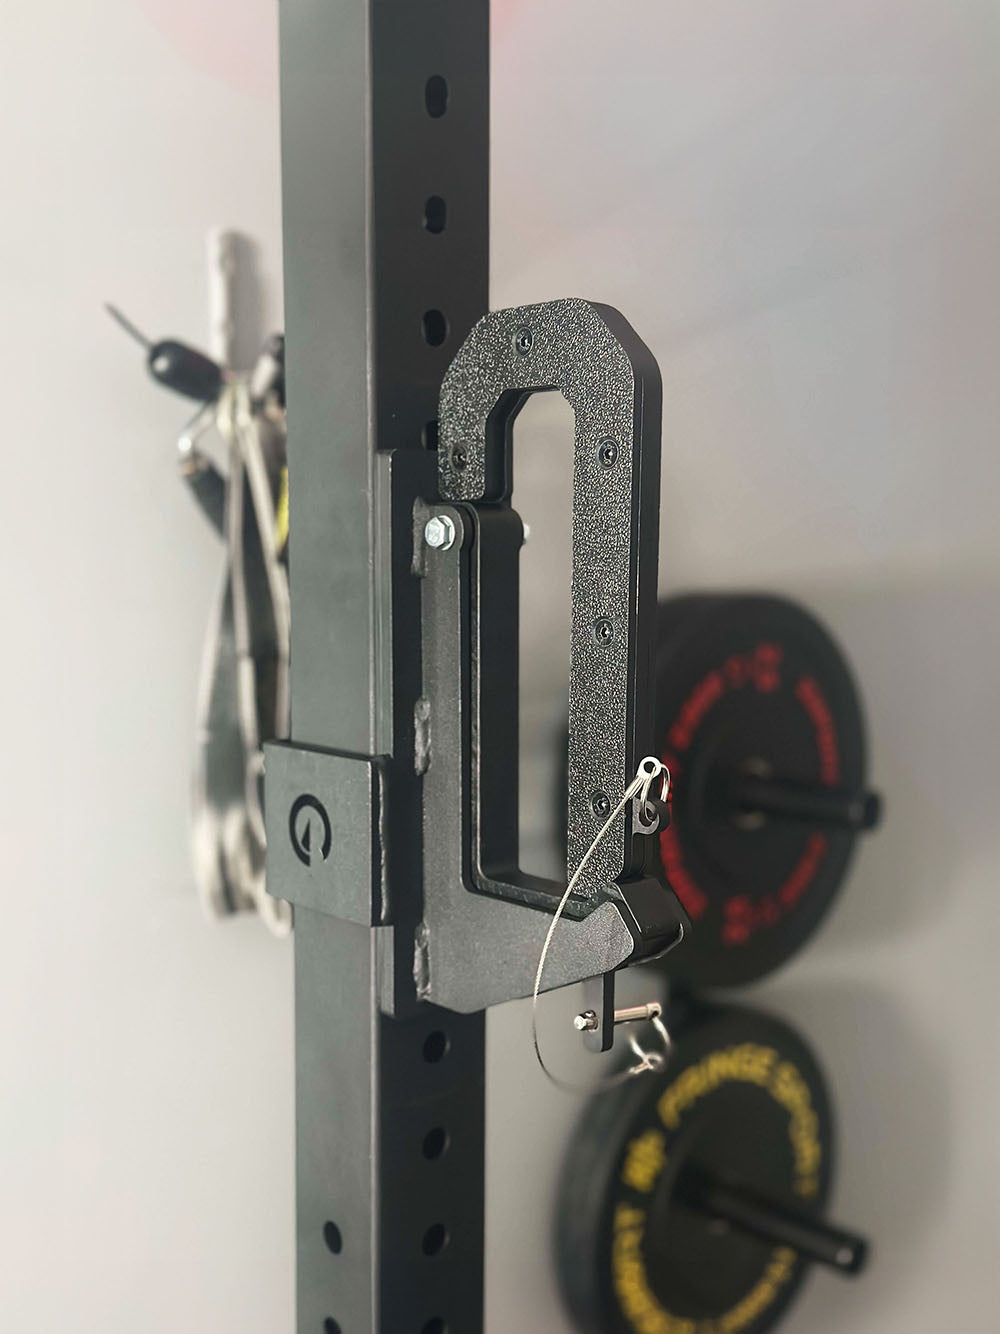 The Calf Cup rack attachment is the best calf solution for those looking to train calves at home but also use the device as a standard J-Cup. This image presents The Calf Cup connected to a workout rack.